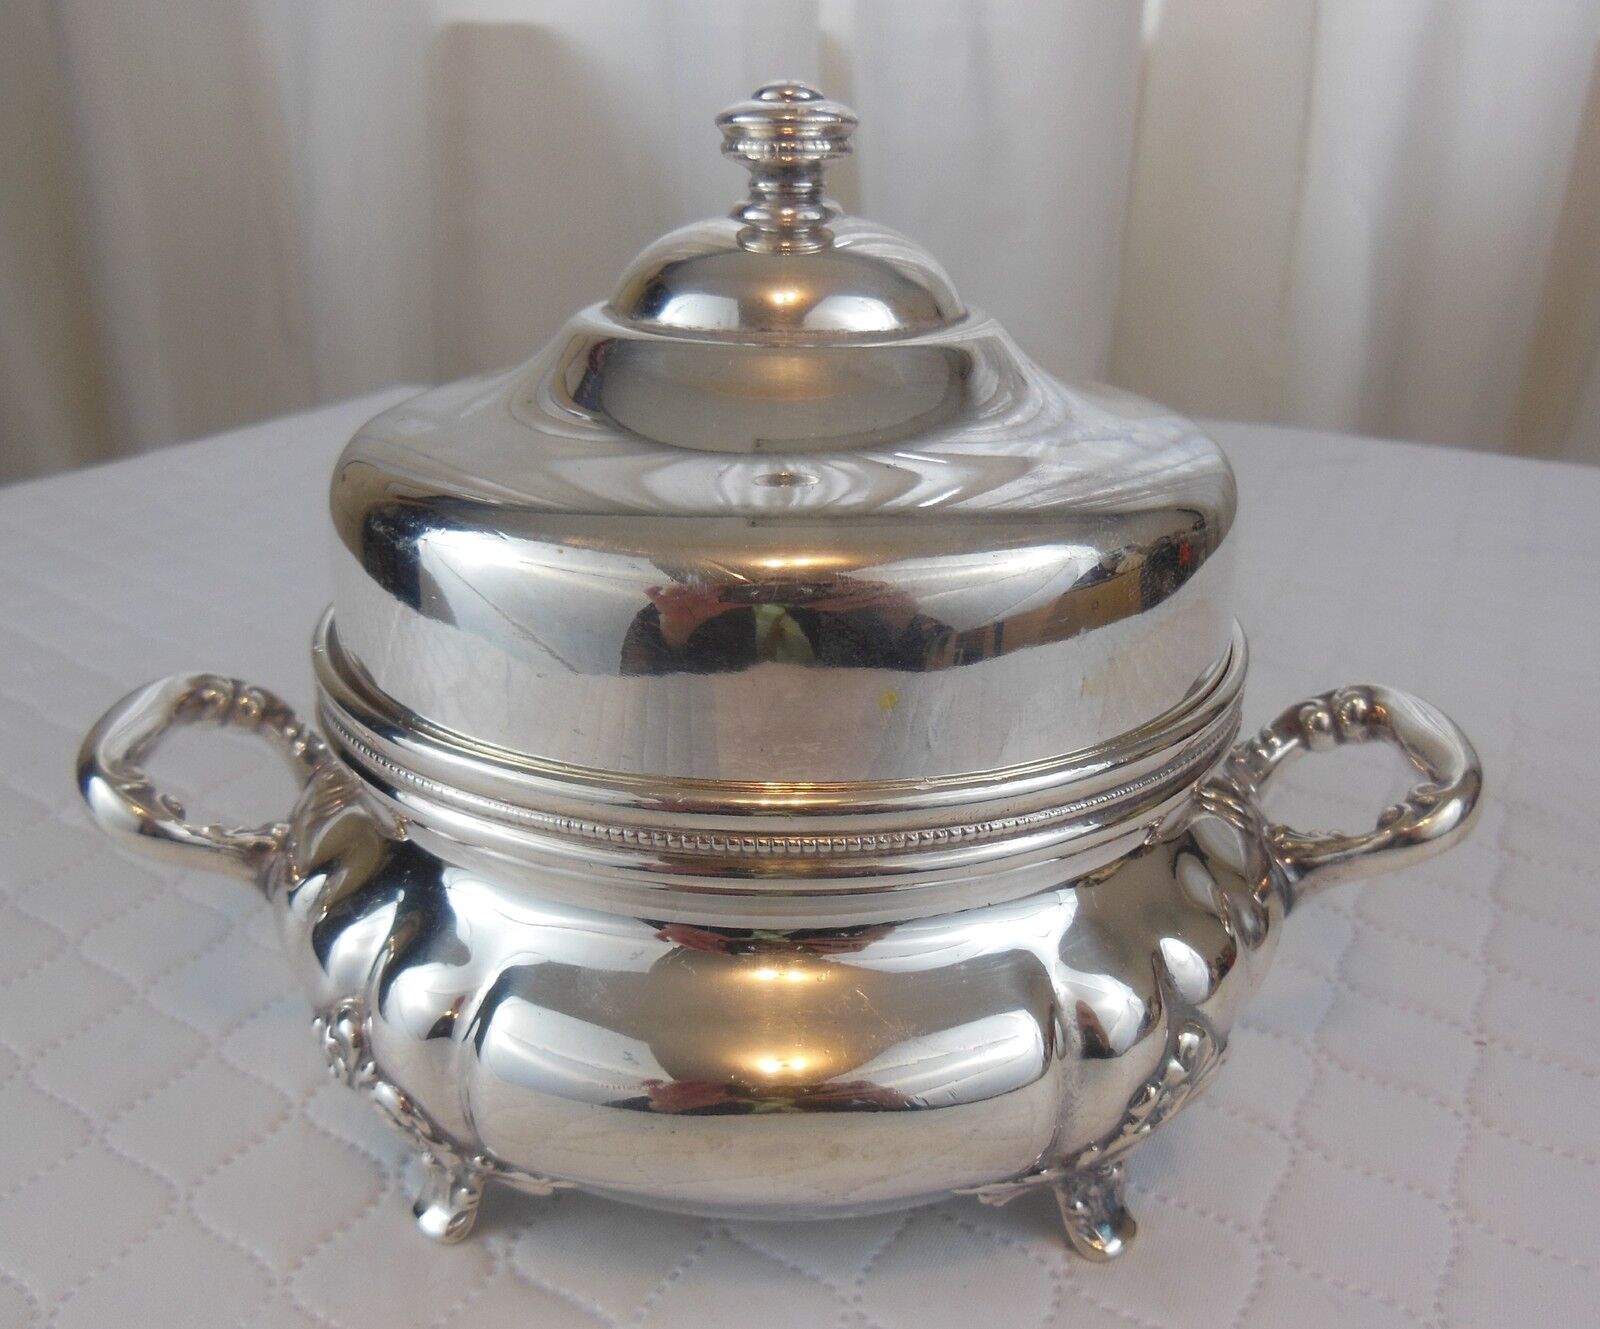 ANTIQUE THE AMERICAN SILVER CO. SILVERPLATED BUTTER DISH